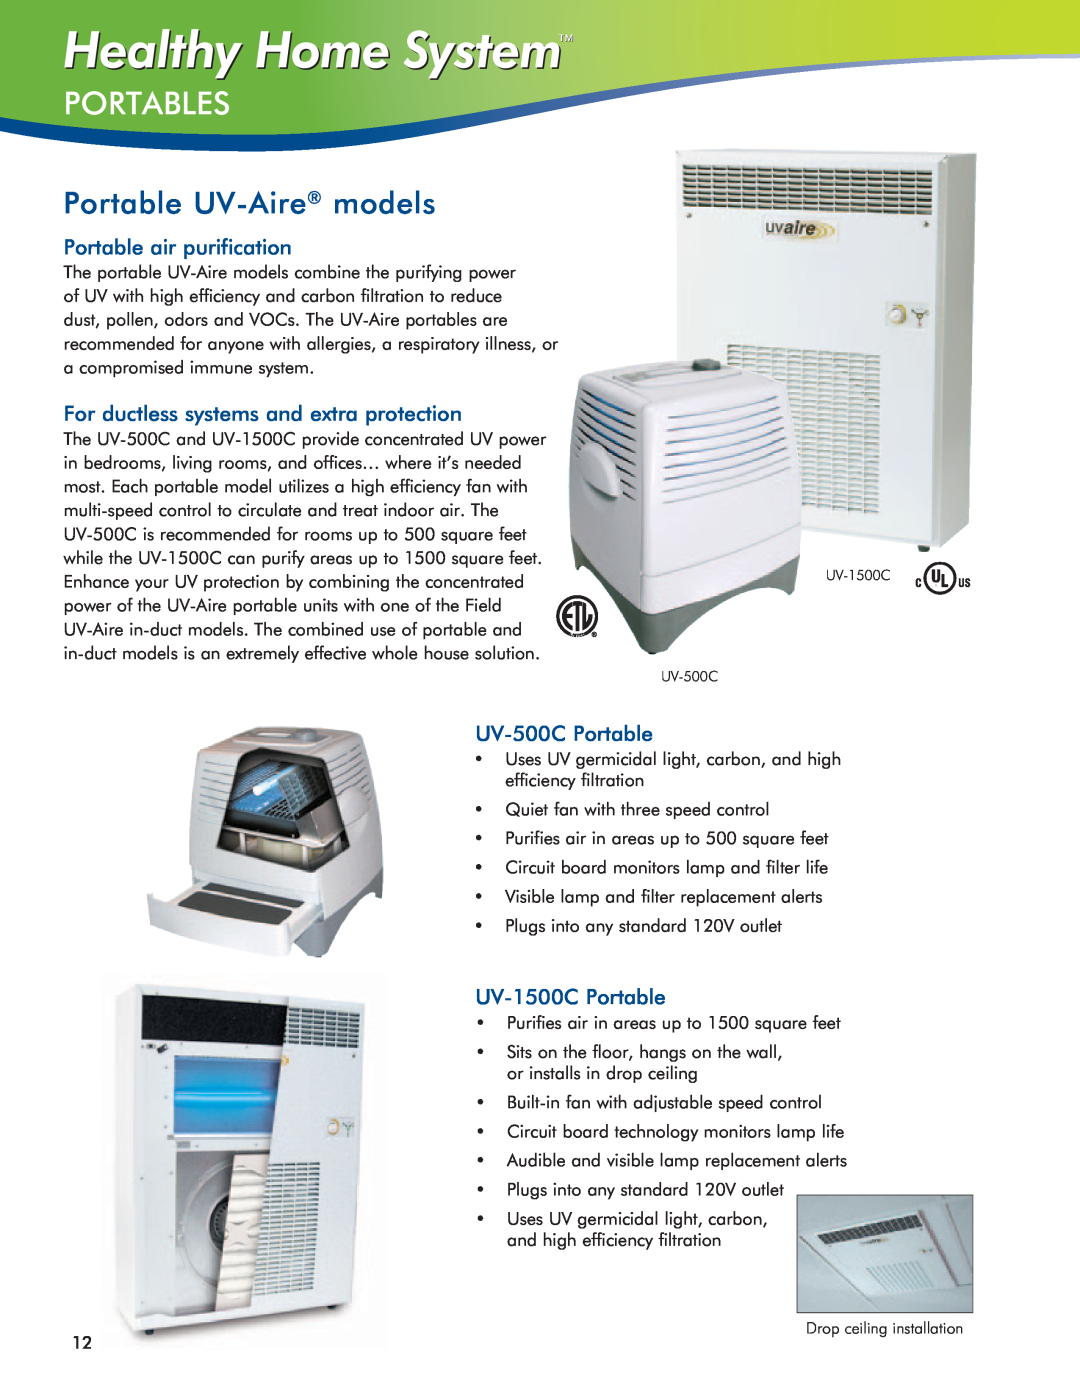 Field Controls IAQ11 Portables, Portable air purification, For ductless systems and extra protection, UV-500CPortable 